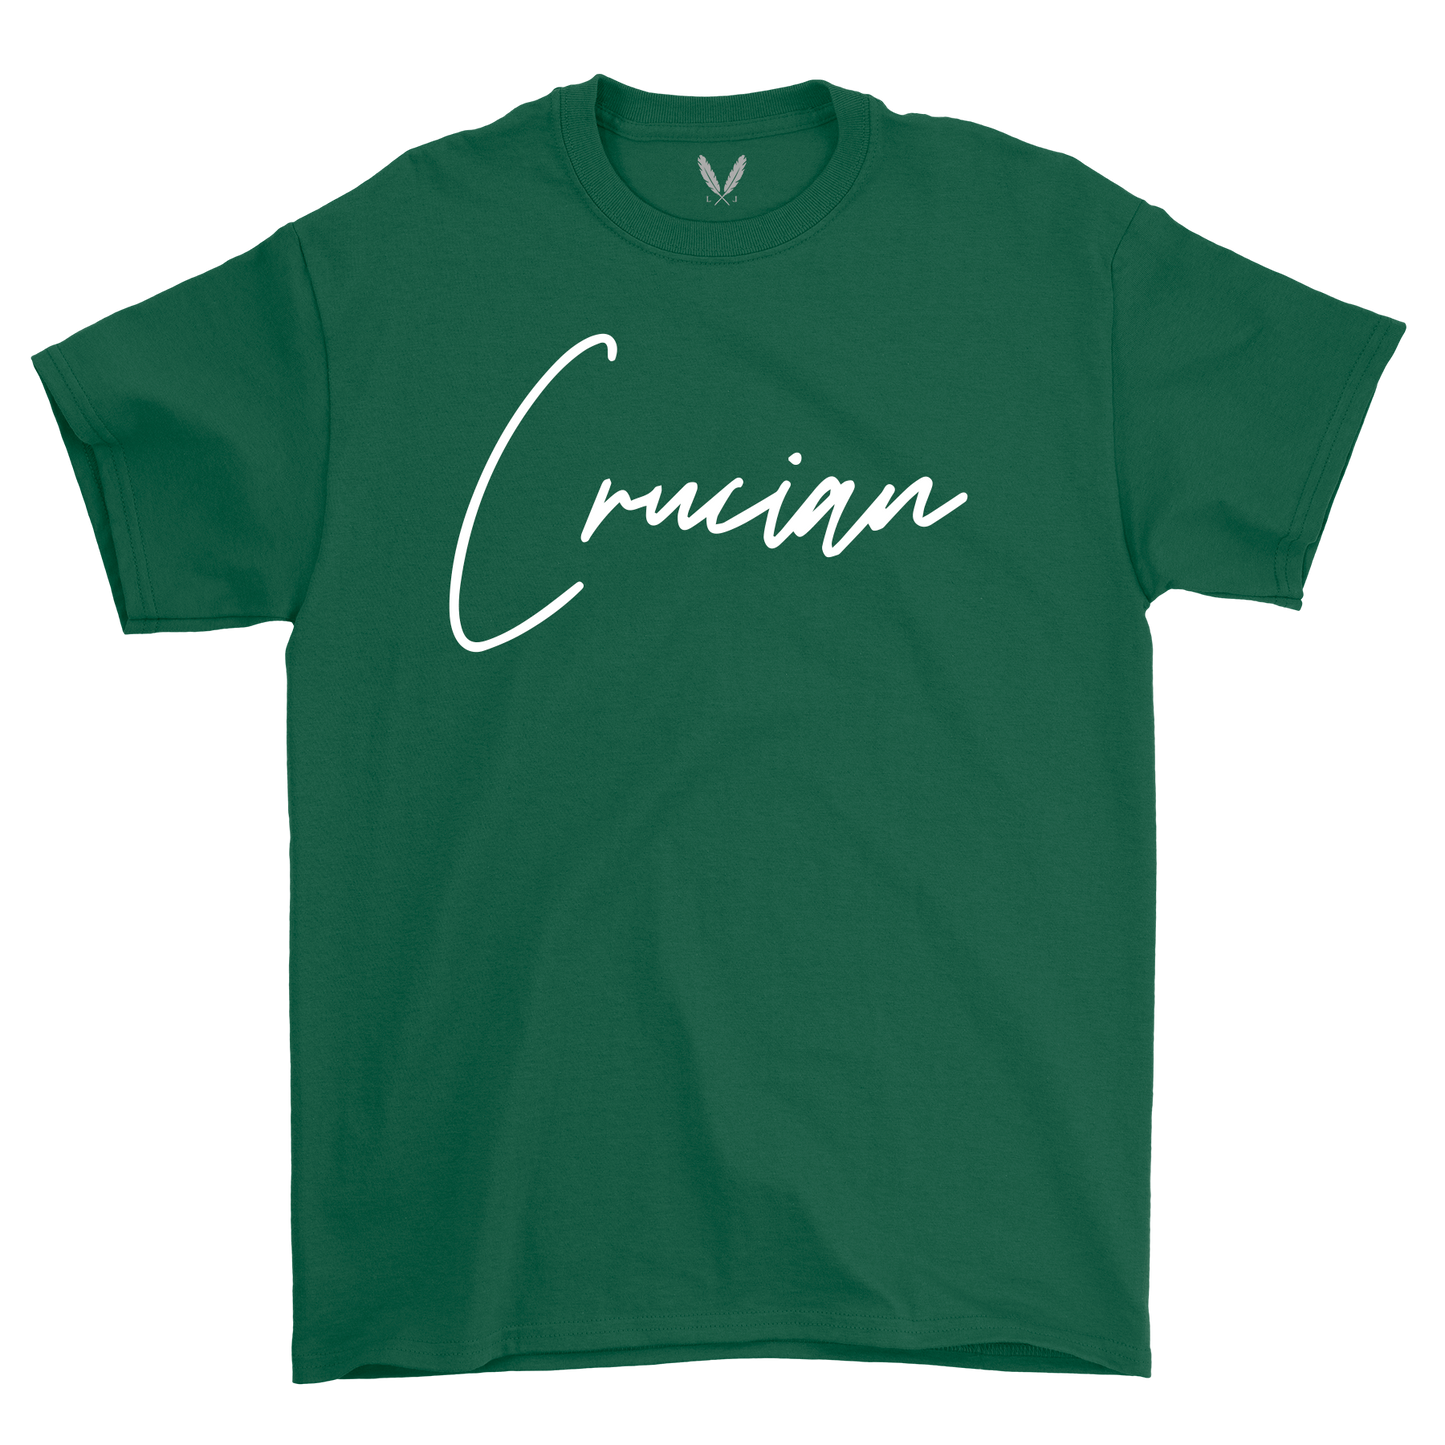 Crucian Script Logo - Forest Green and White